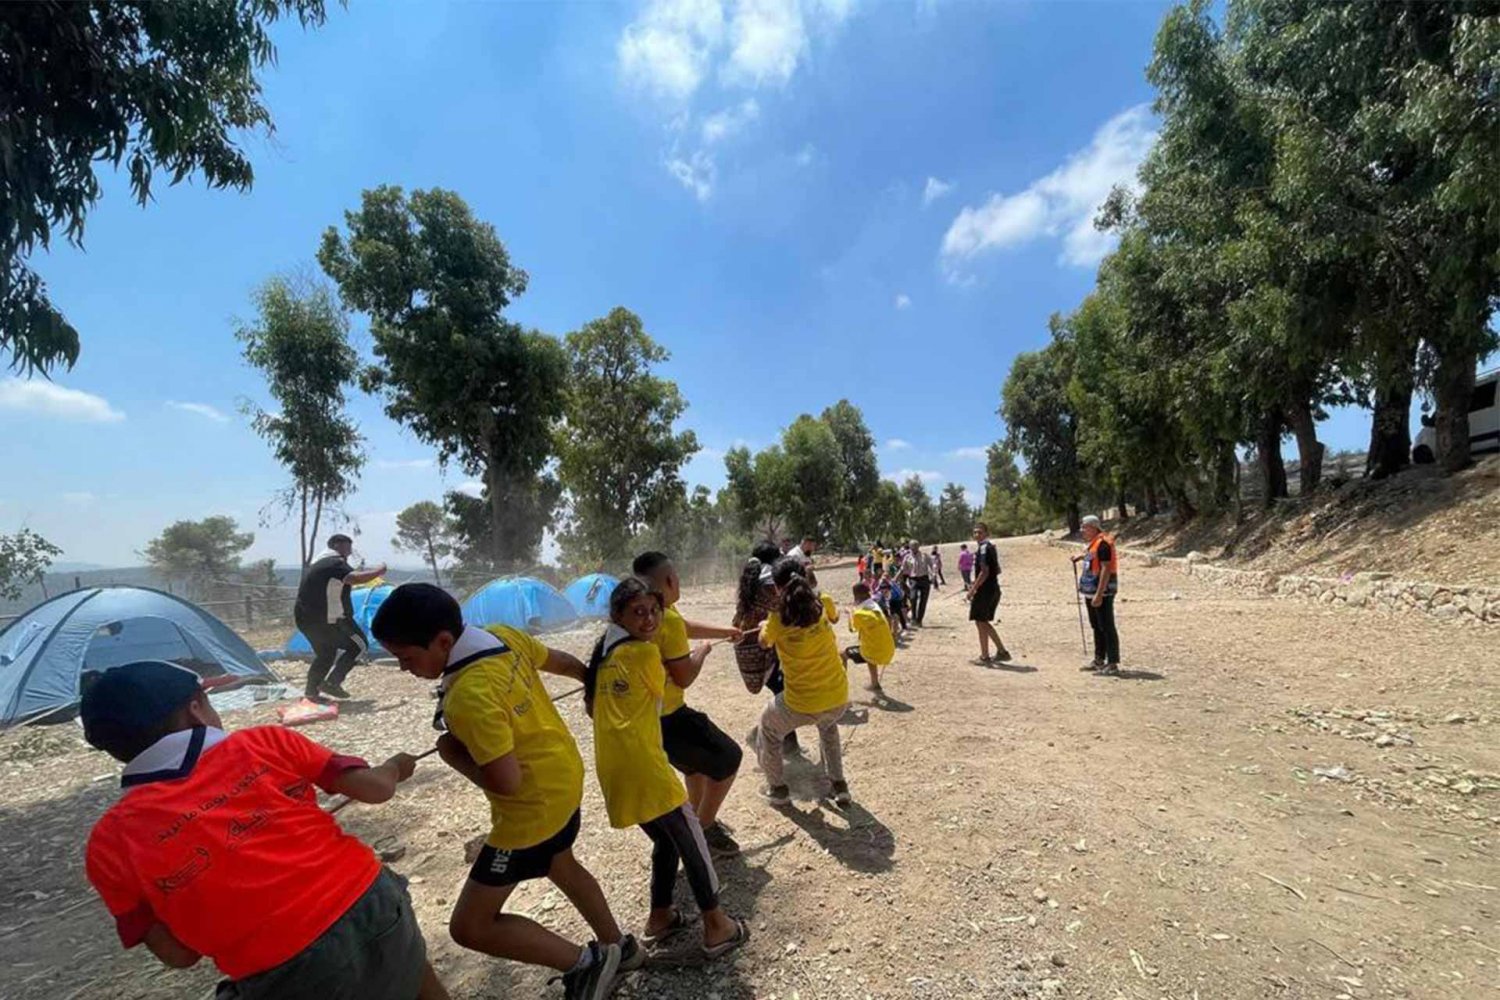 Campers engage in a tug-of-rope competition during “Silwan Summer 2022,” a youth camp for the al-Bustan district scout group